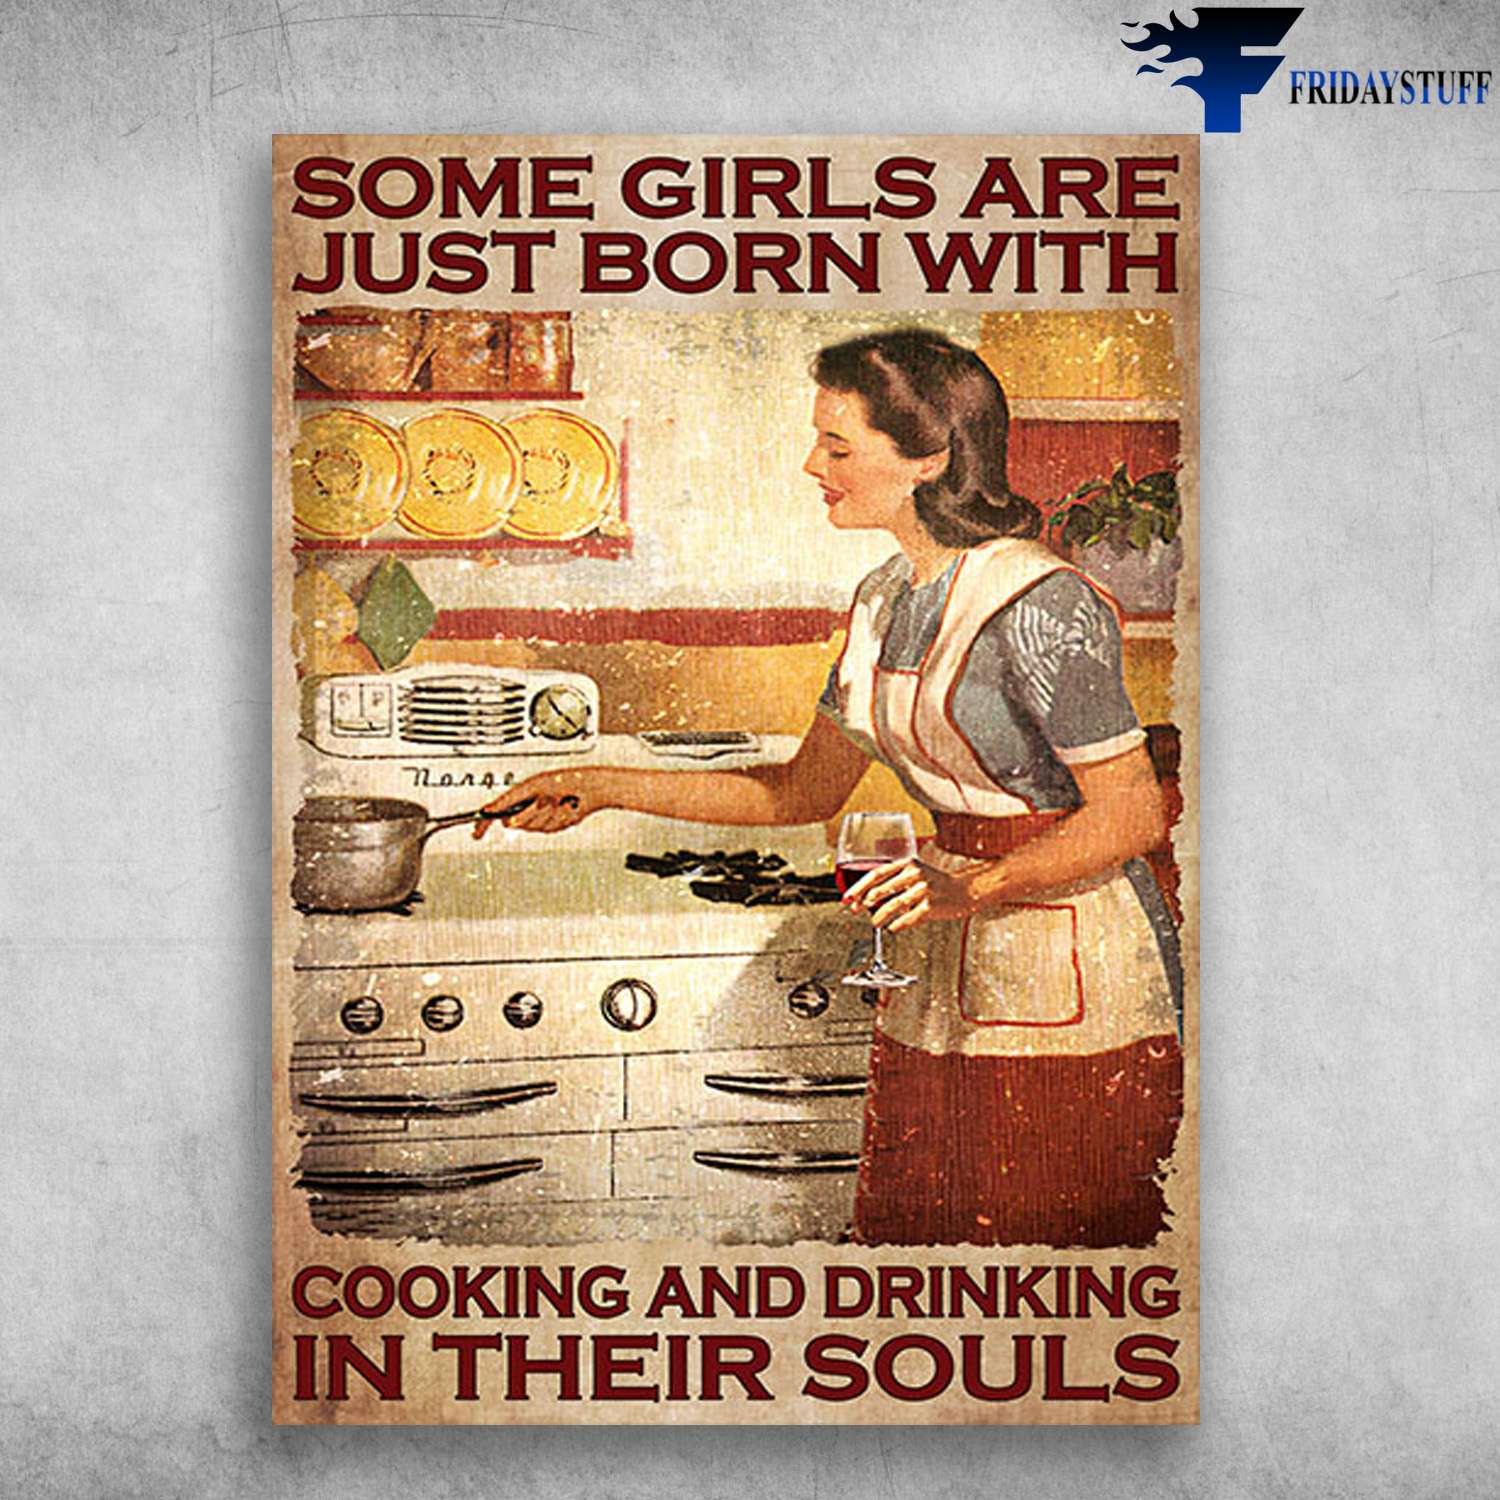 Cooking And Wine - Some Girls Are Just Born With, Cooking And Drinking, In Their Souls